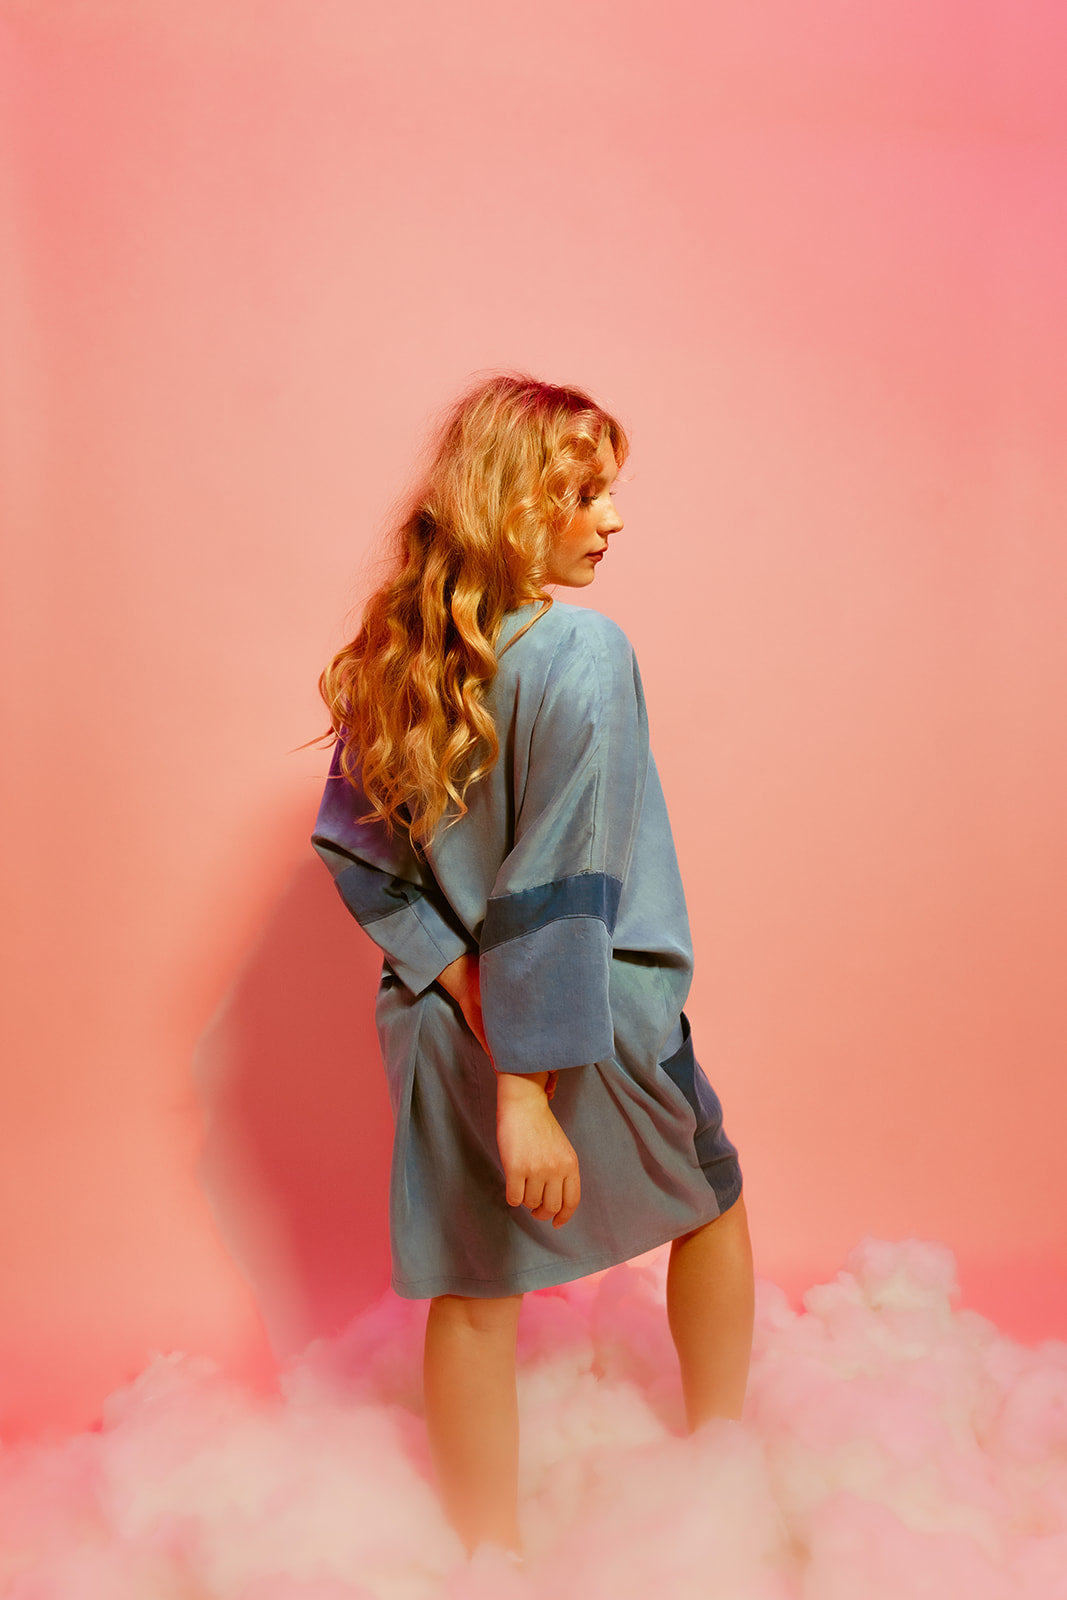 A woman is standing on clouds, posing for a picture in front of a pink background. She is wearing a blue gown dress.